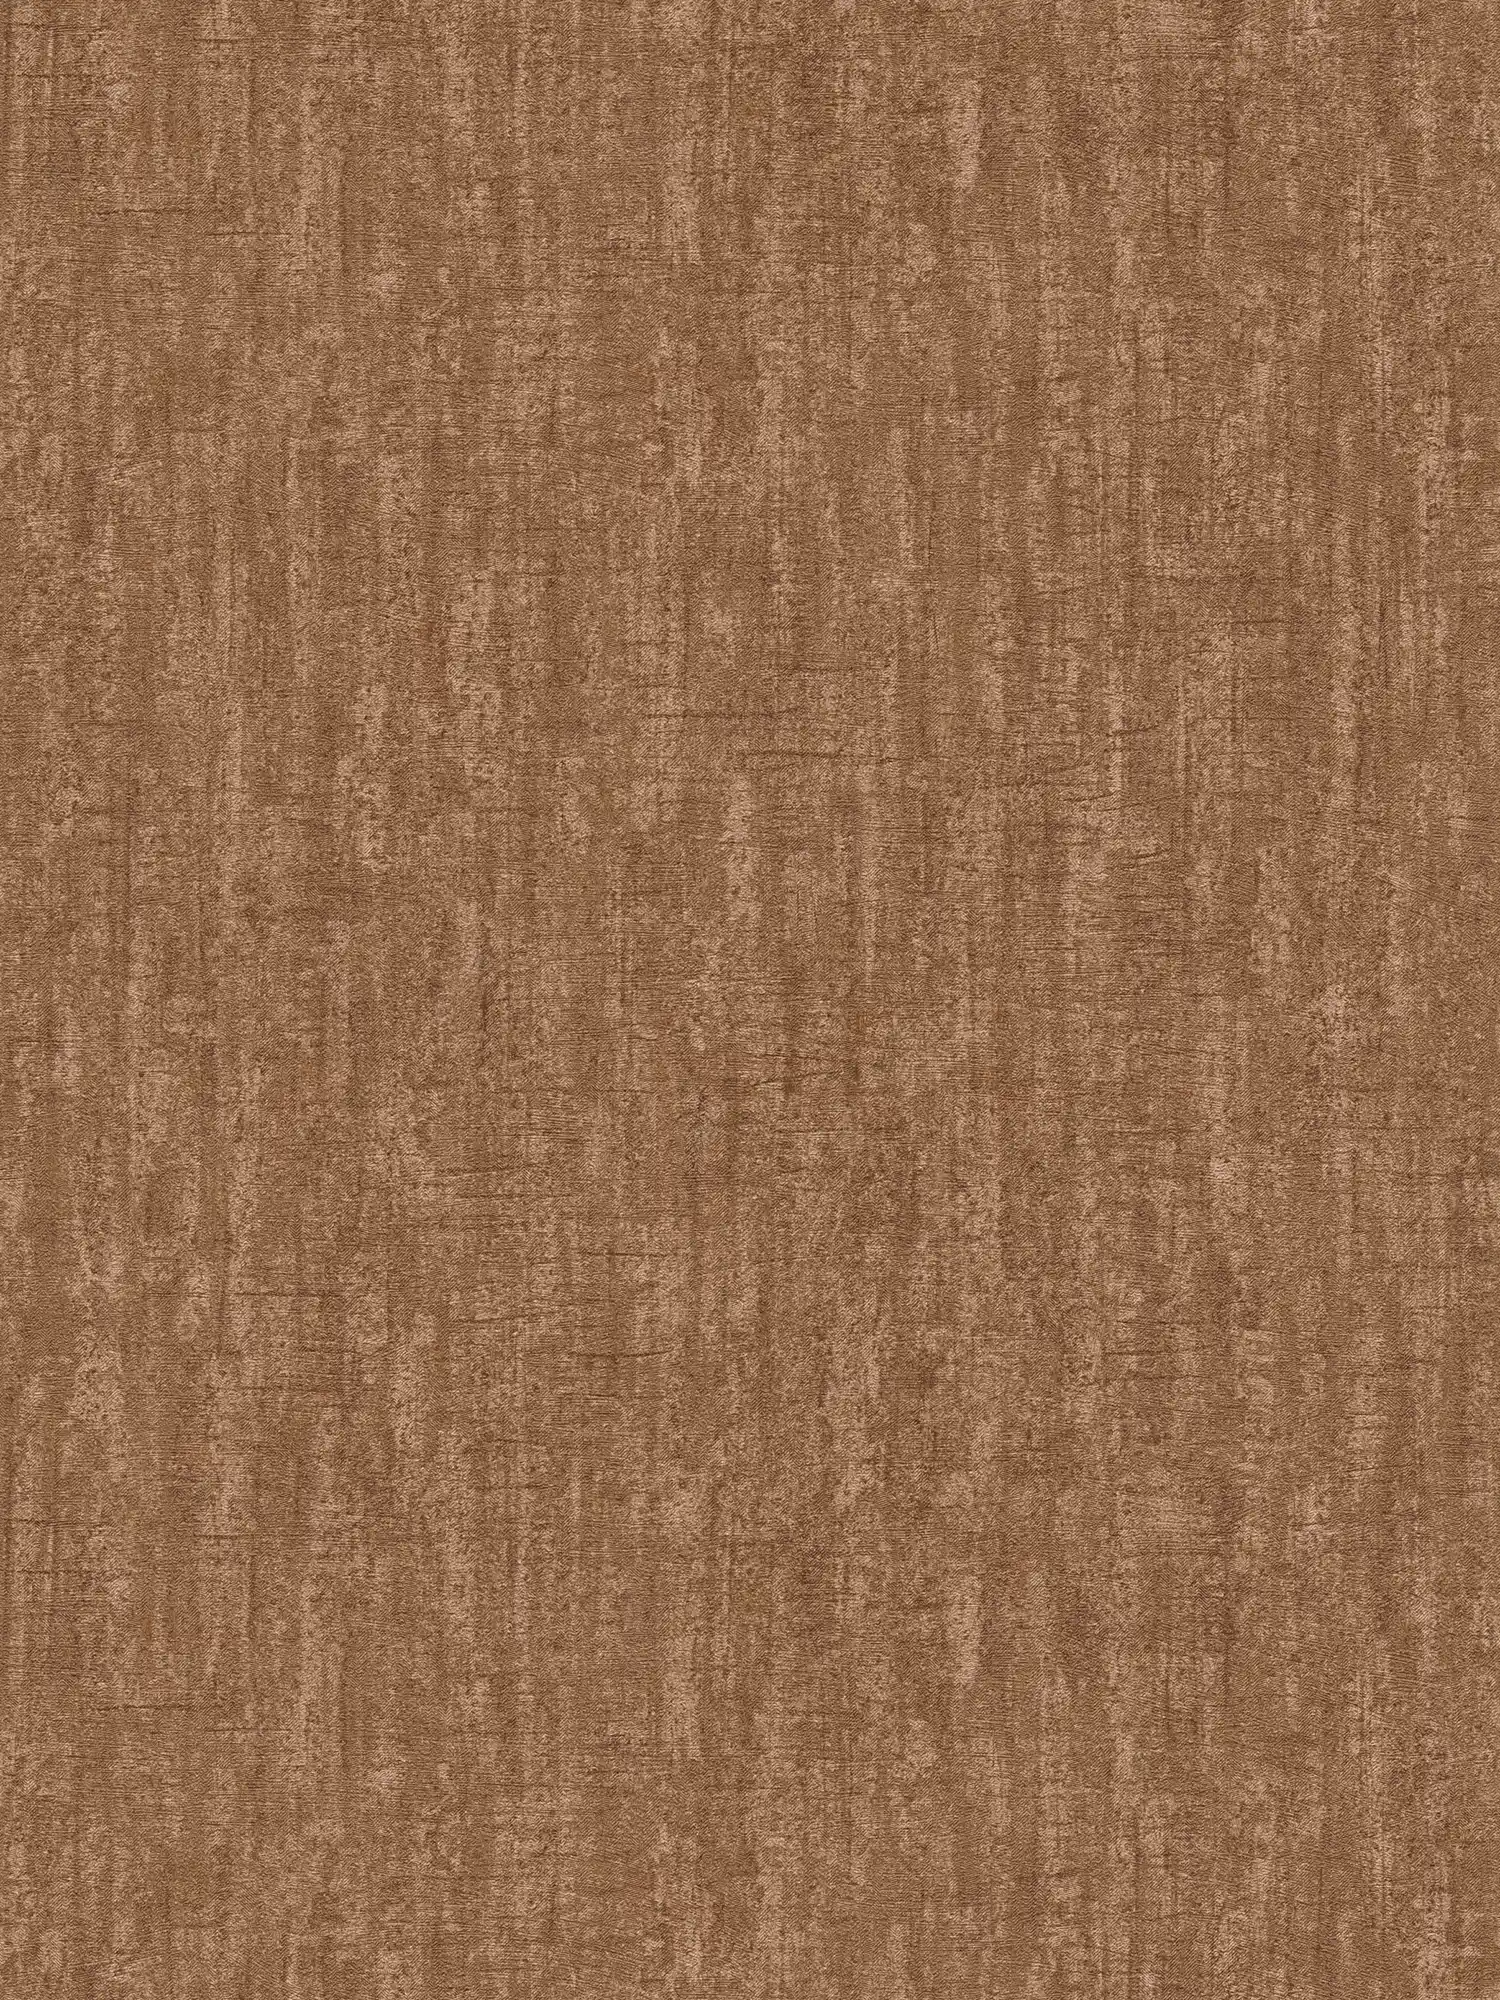 wallpaper rust brown mottled, with structure & gloss effect - brown, orange
